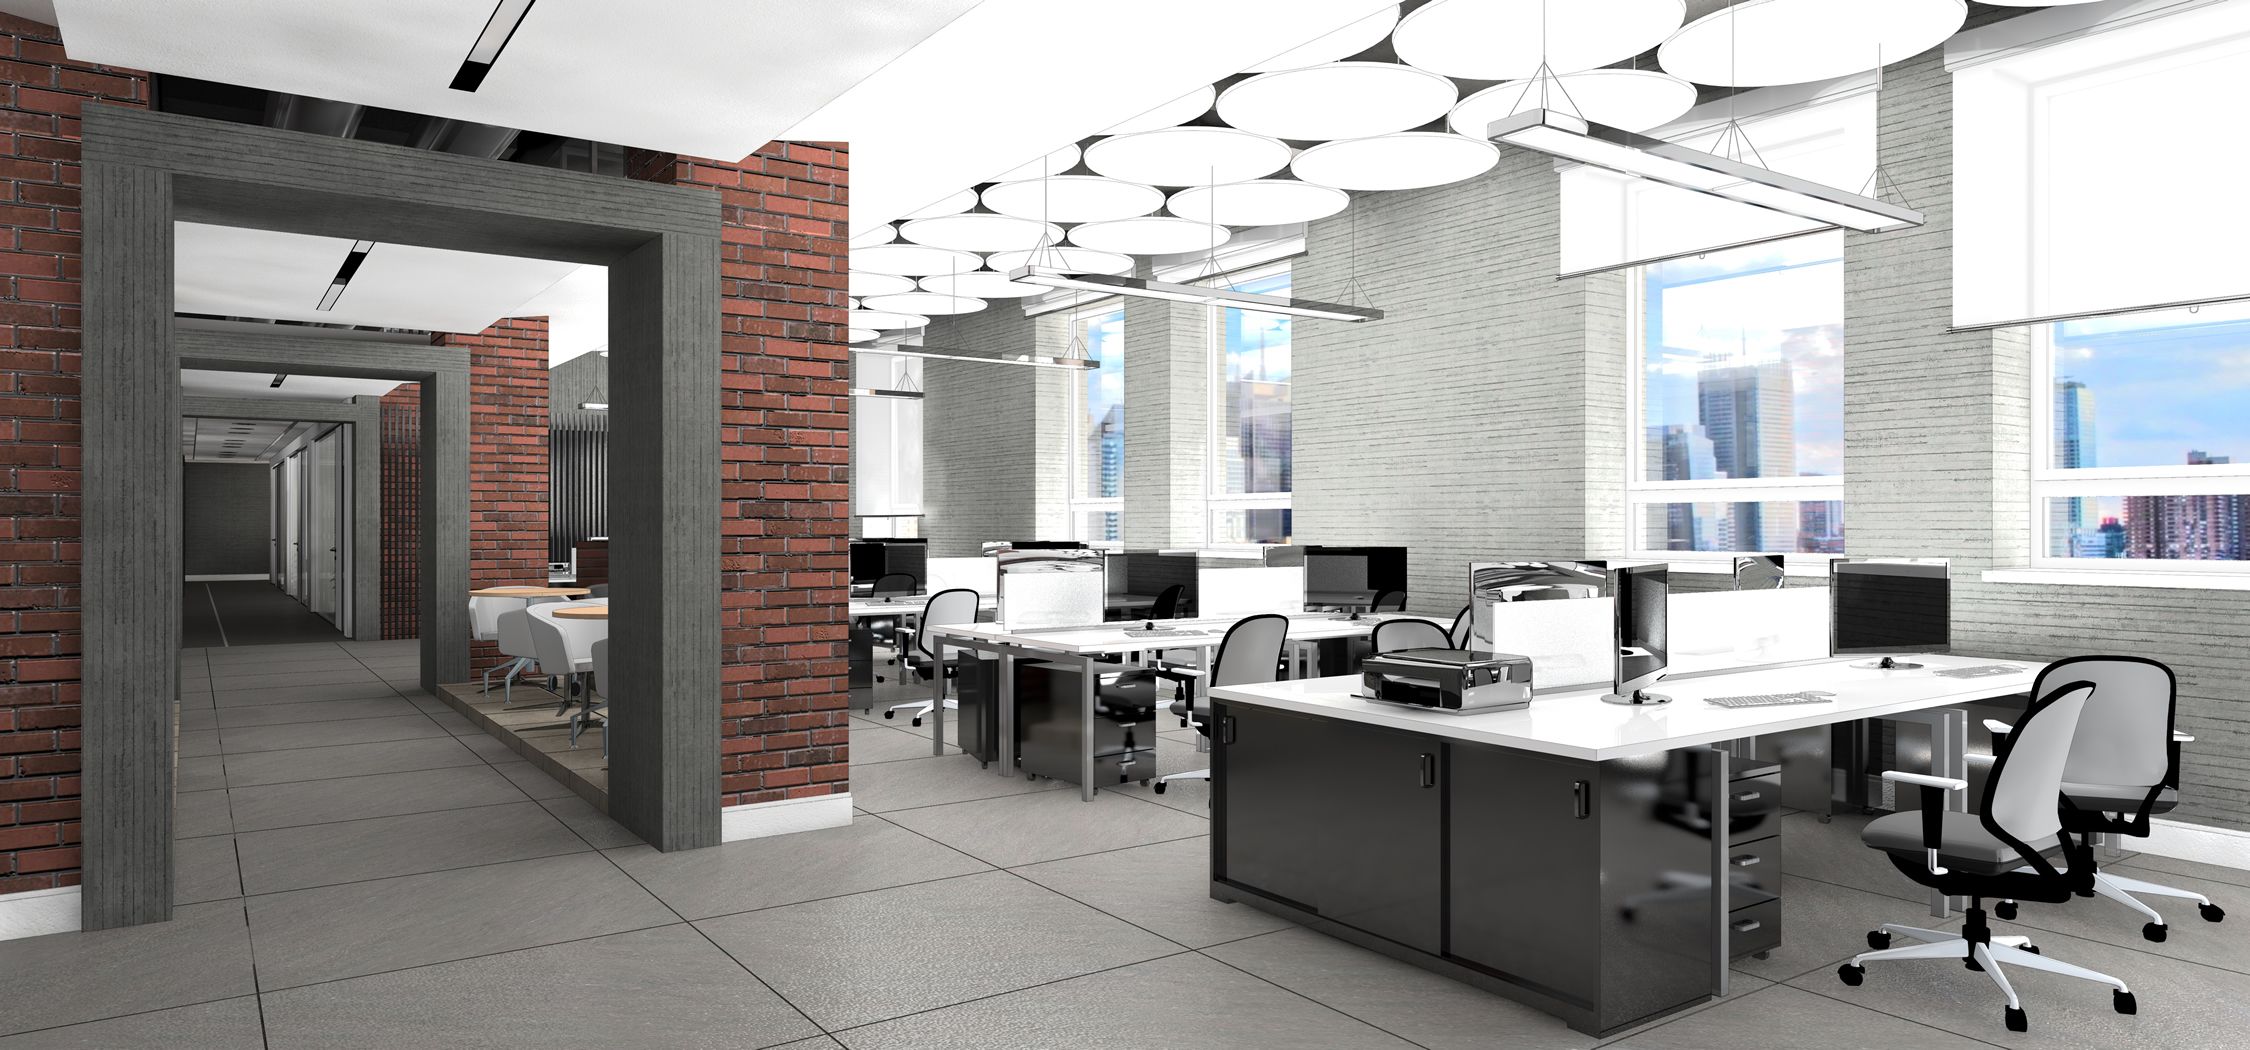 office space with grey accents and brick pillars, light 